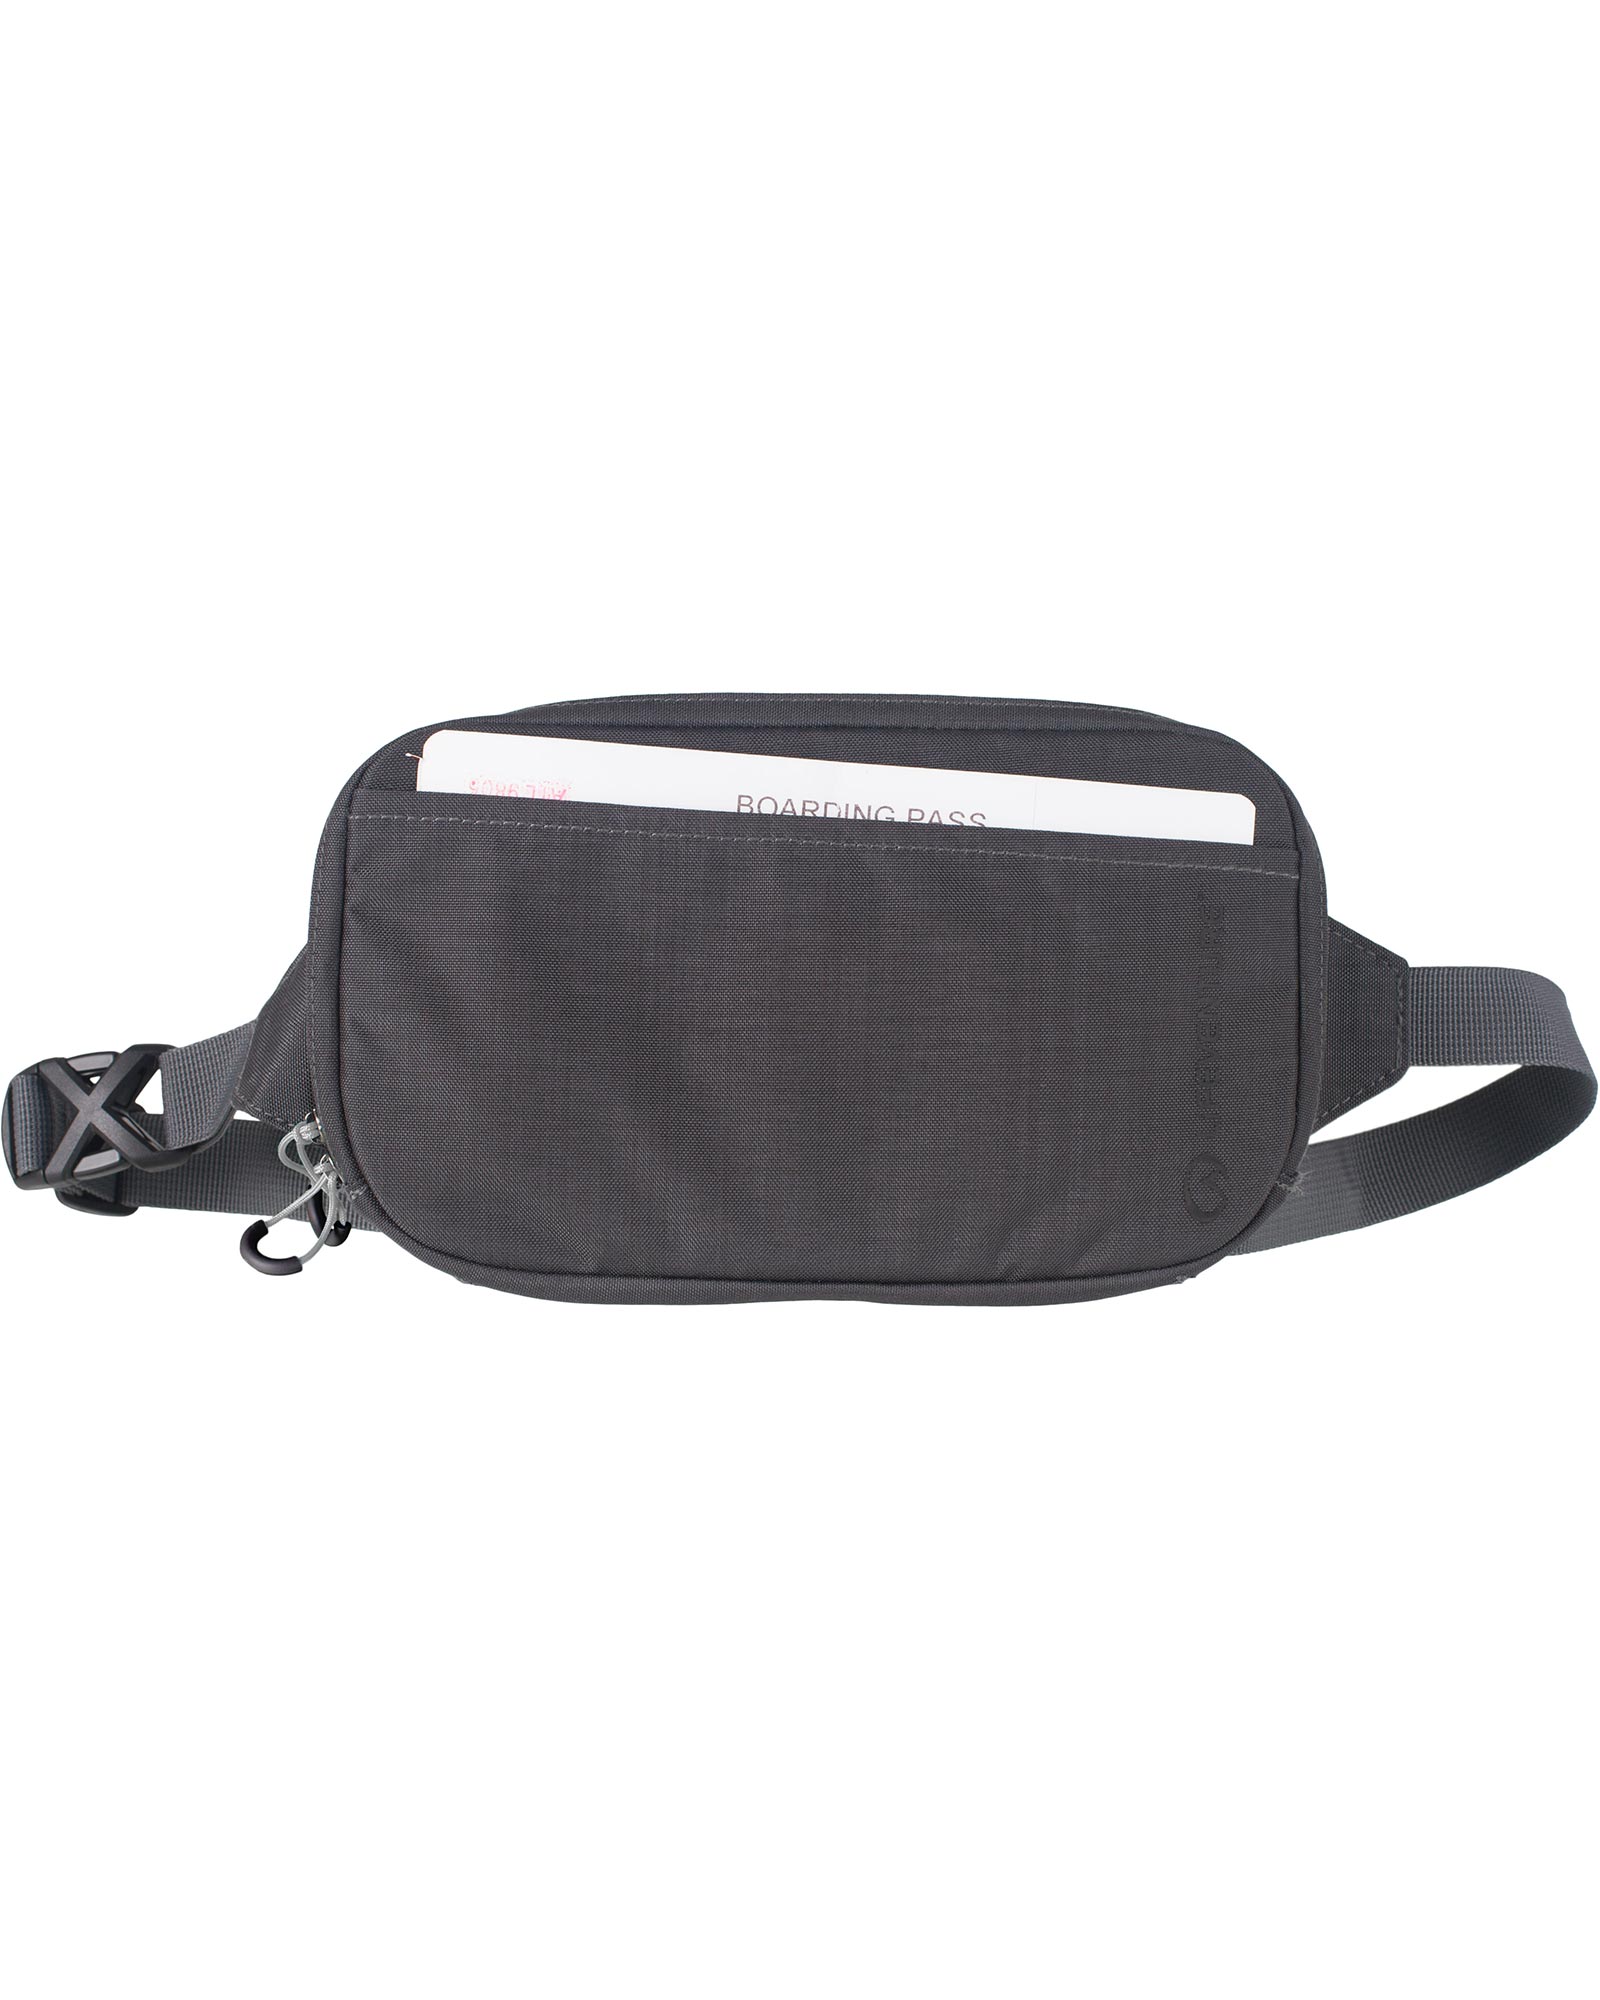 Lifeventure Rfid Travel Belt Pouch - Recycled